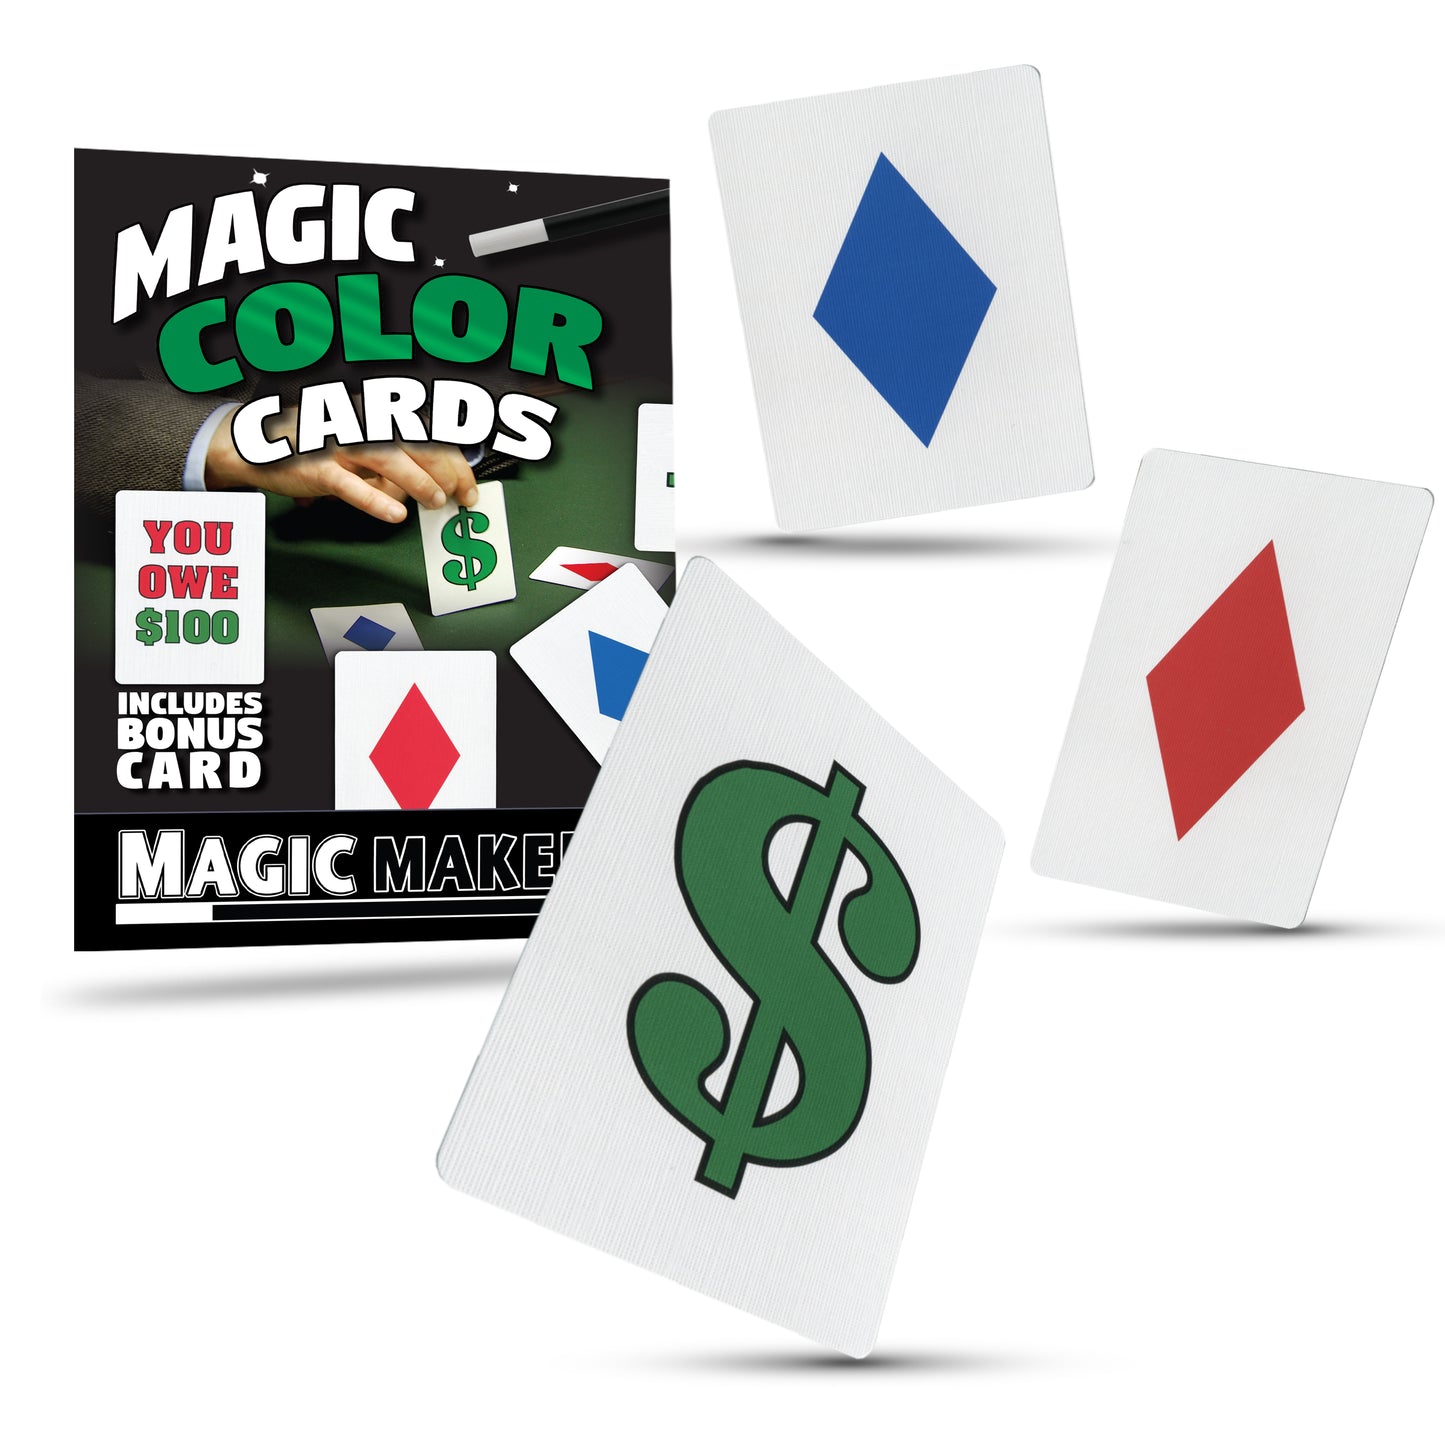 Magic Color Cards - 3 Card Trick With A Twist